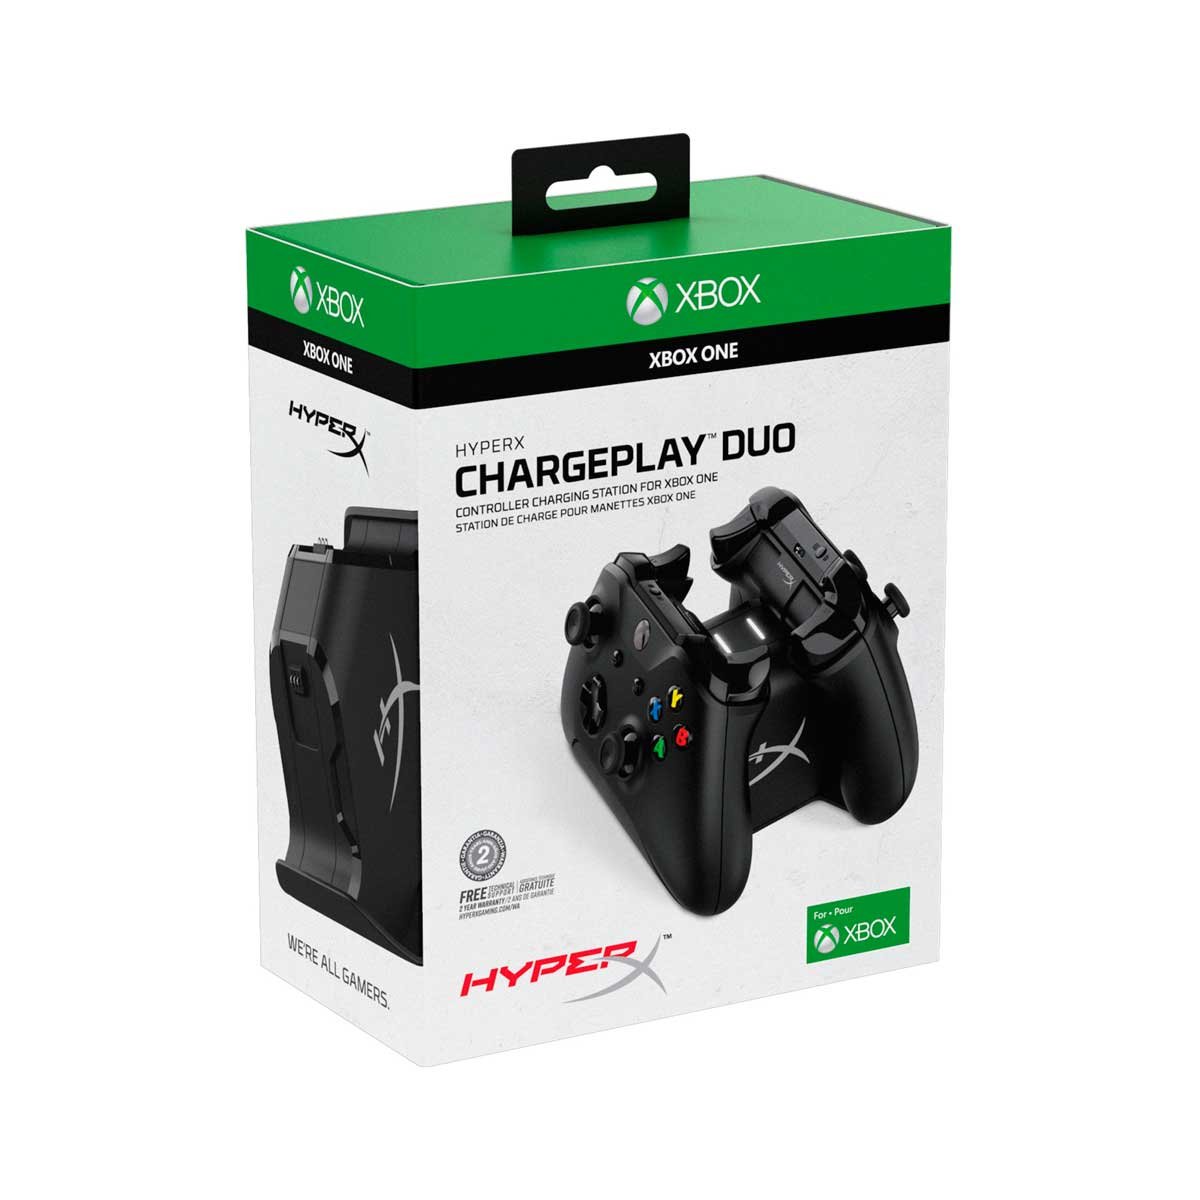 Xbox One Chargeplay Duo Hyperx